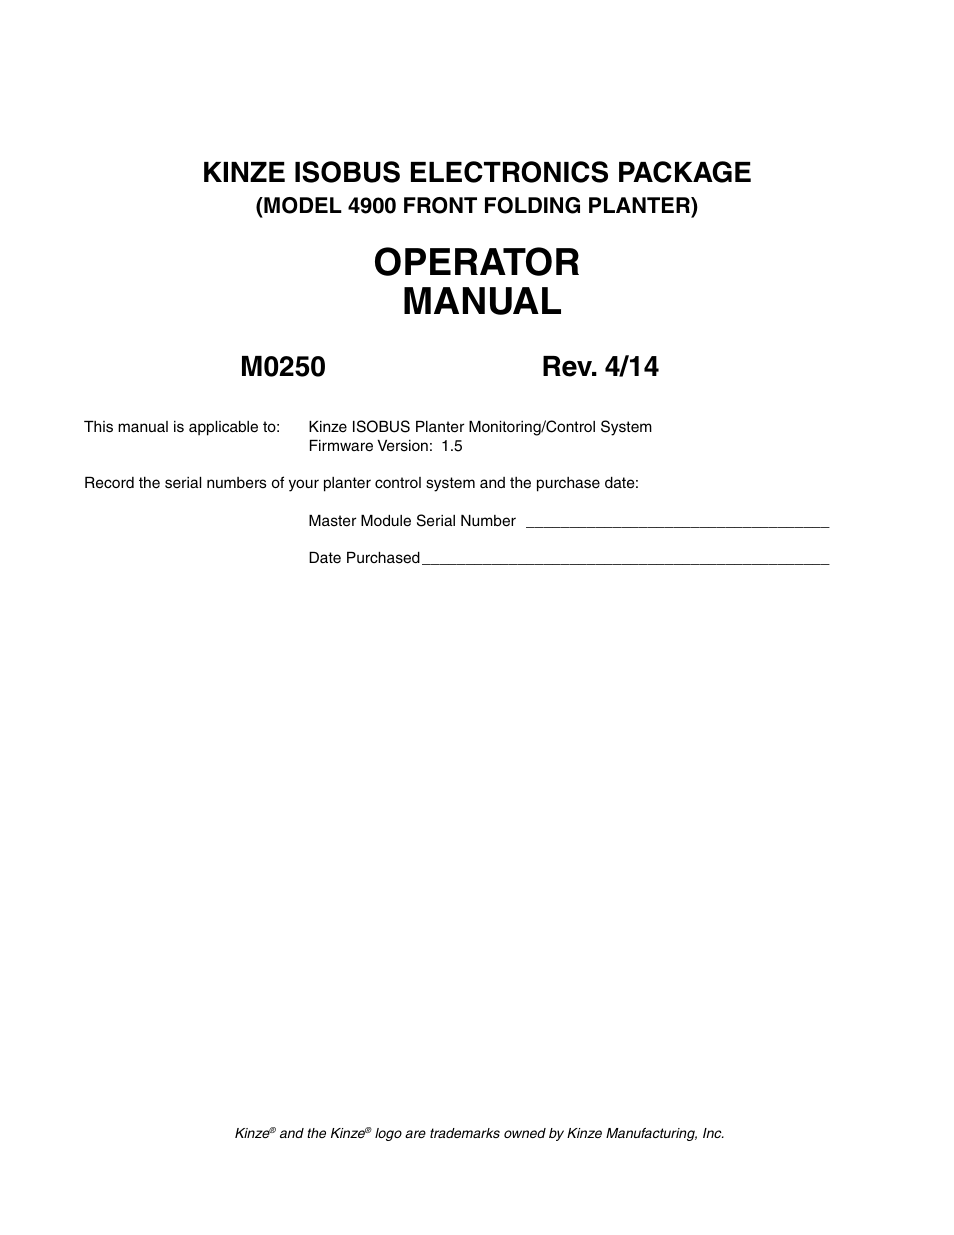 Kinze ISOBUS Electronics Package (4900) Rev. 4/14 User Manual | 60 pages